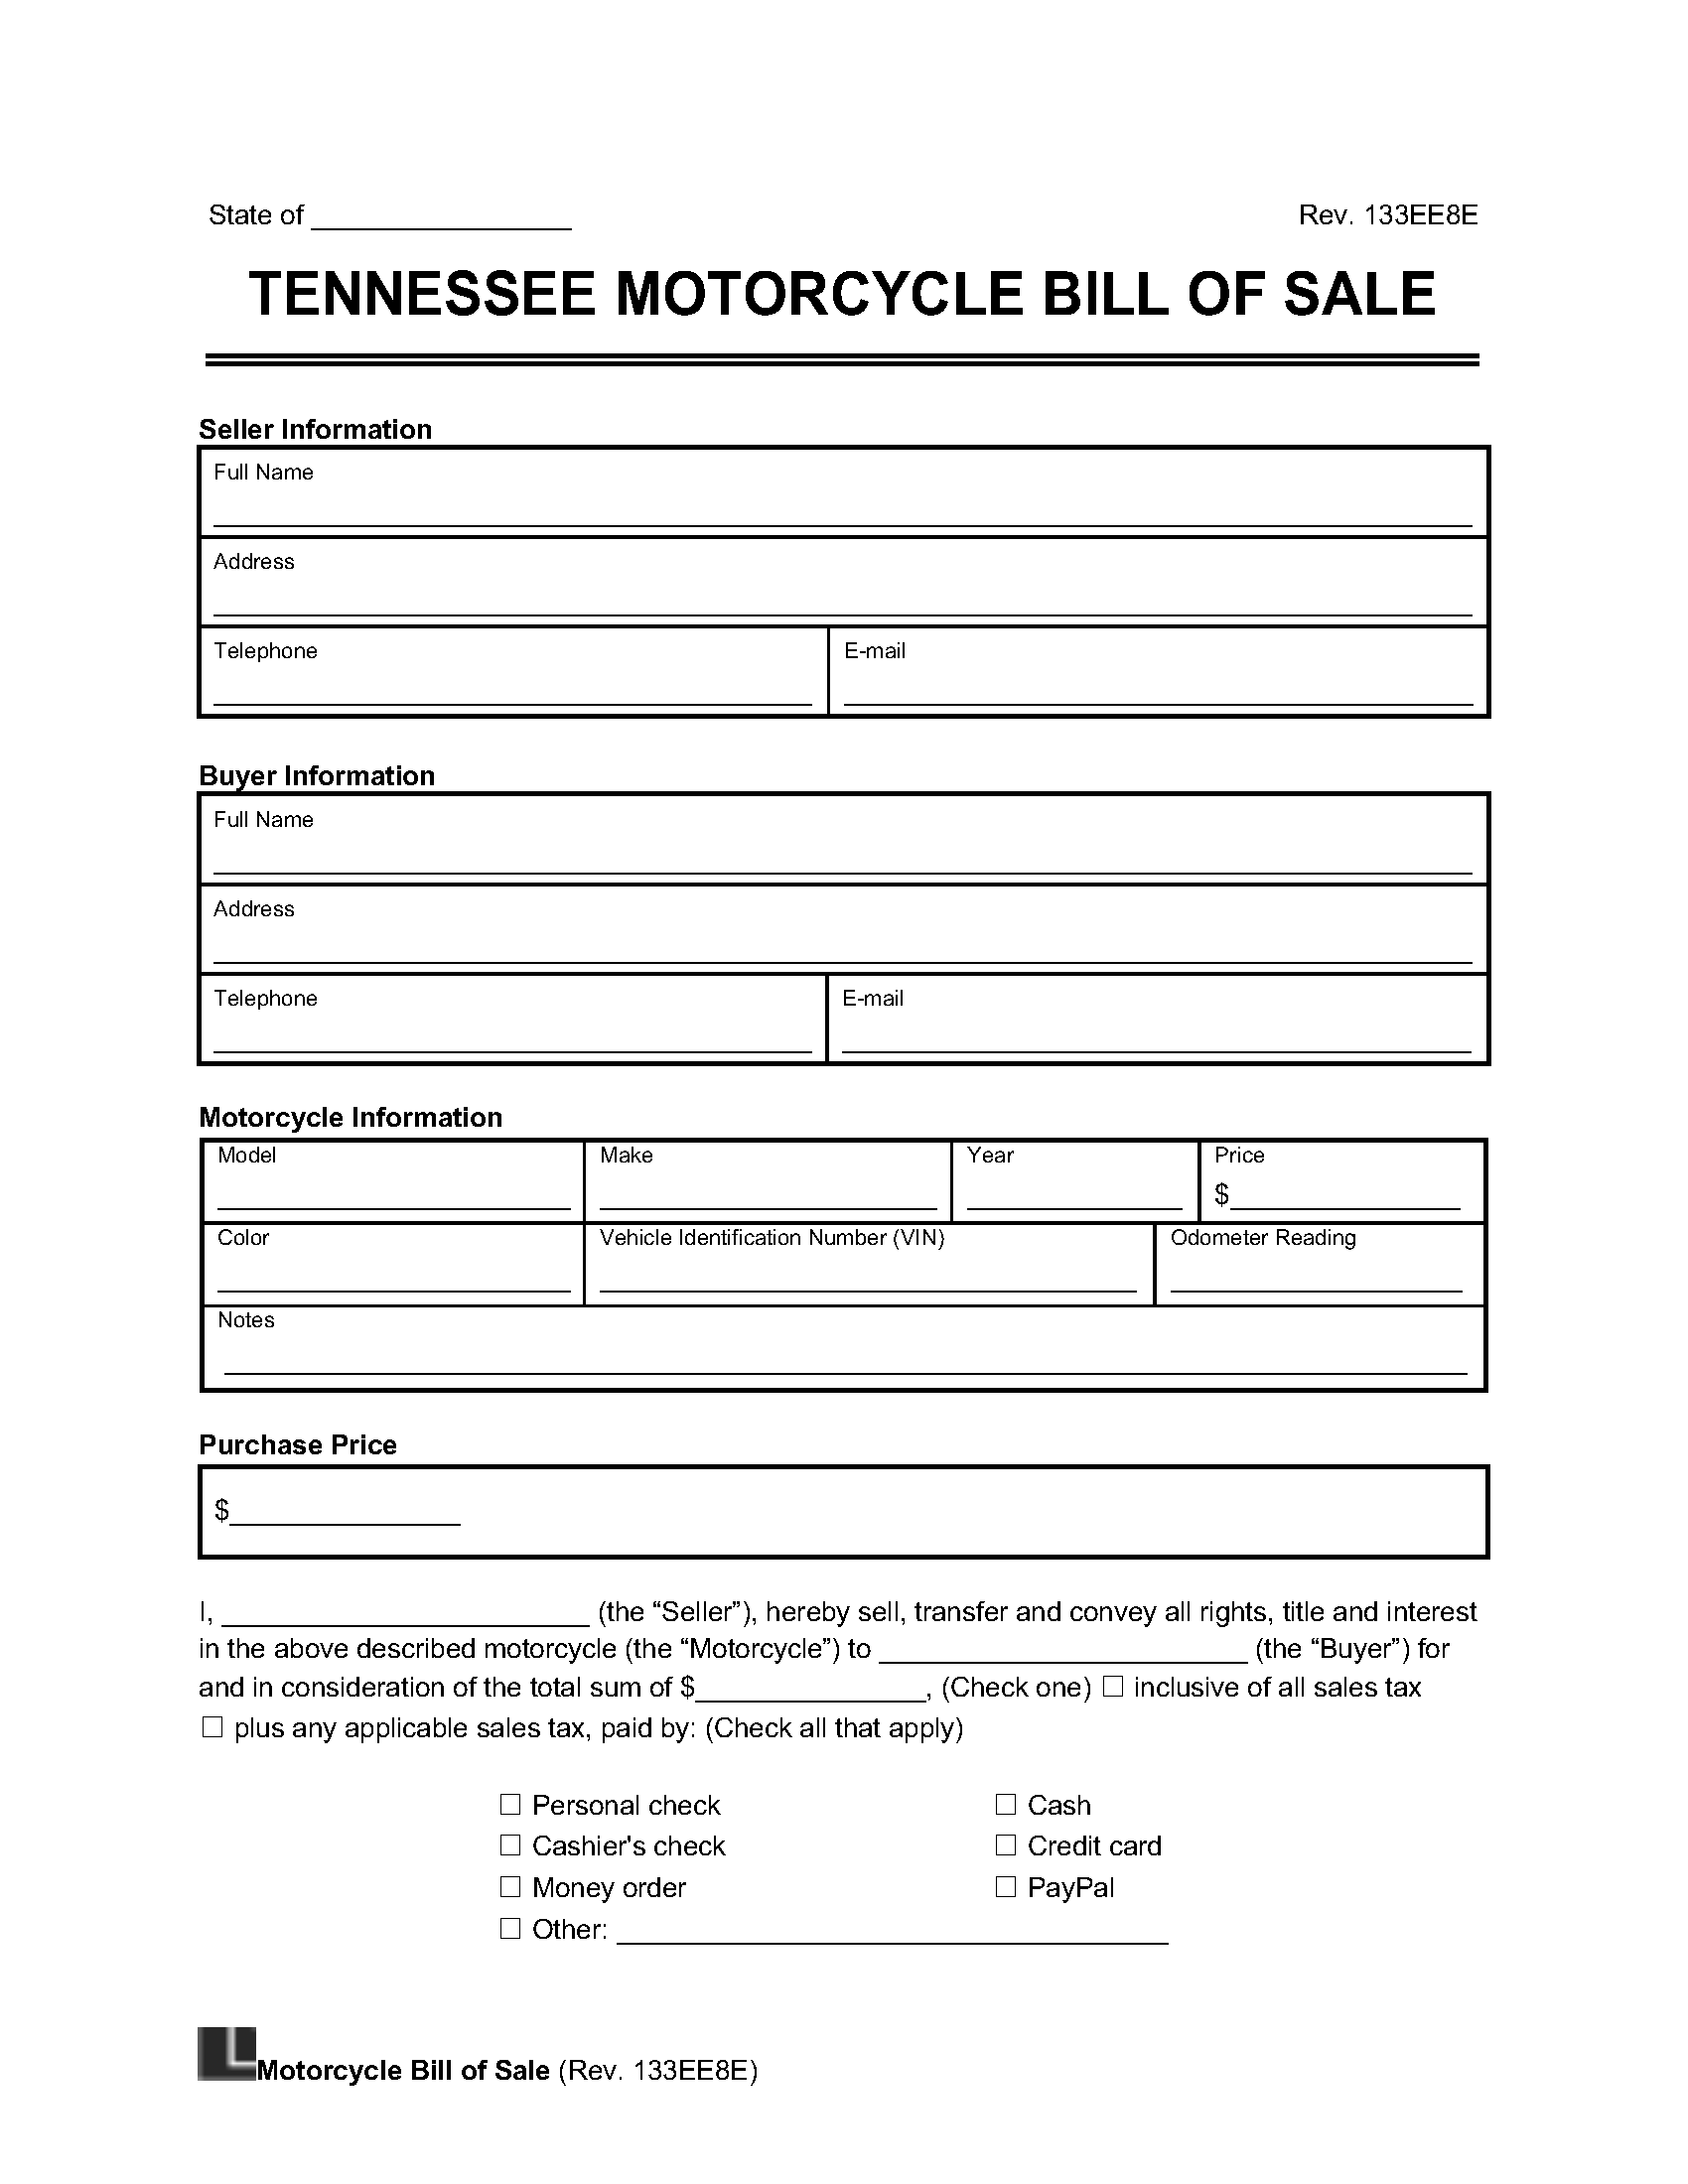 tennessee motorcycle bill of sale